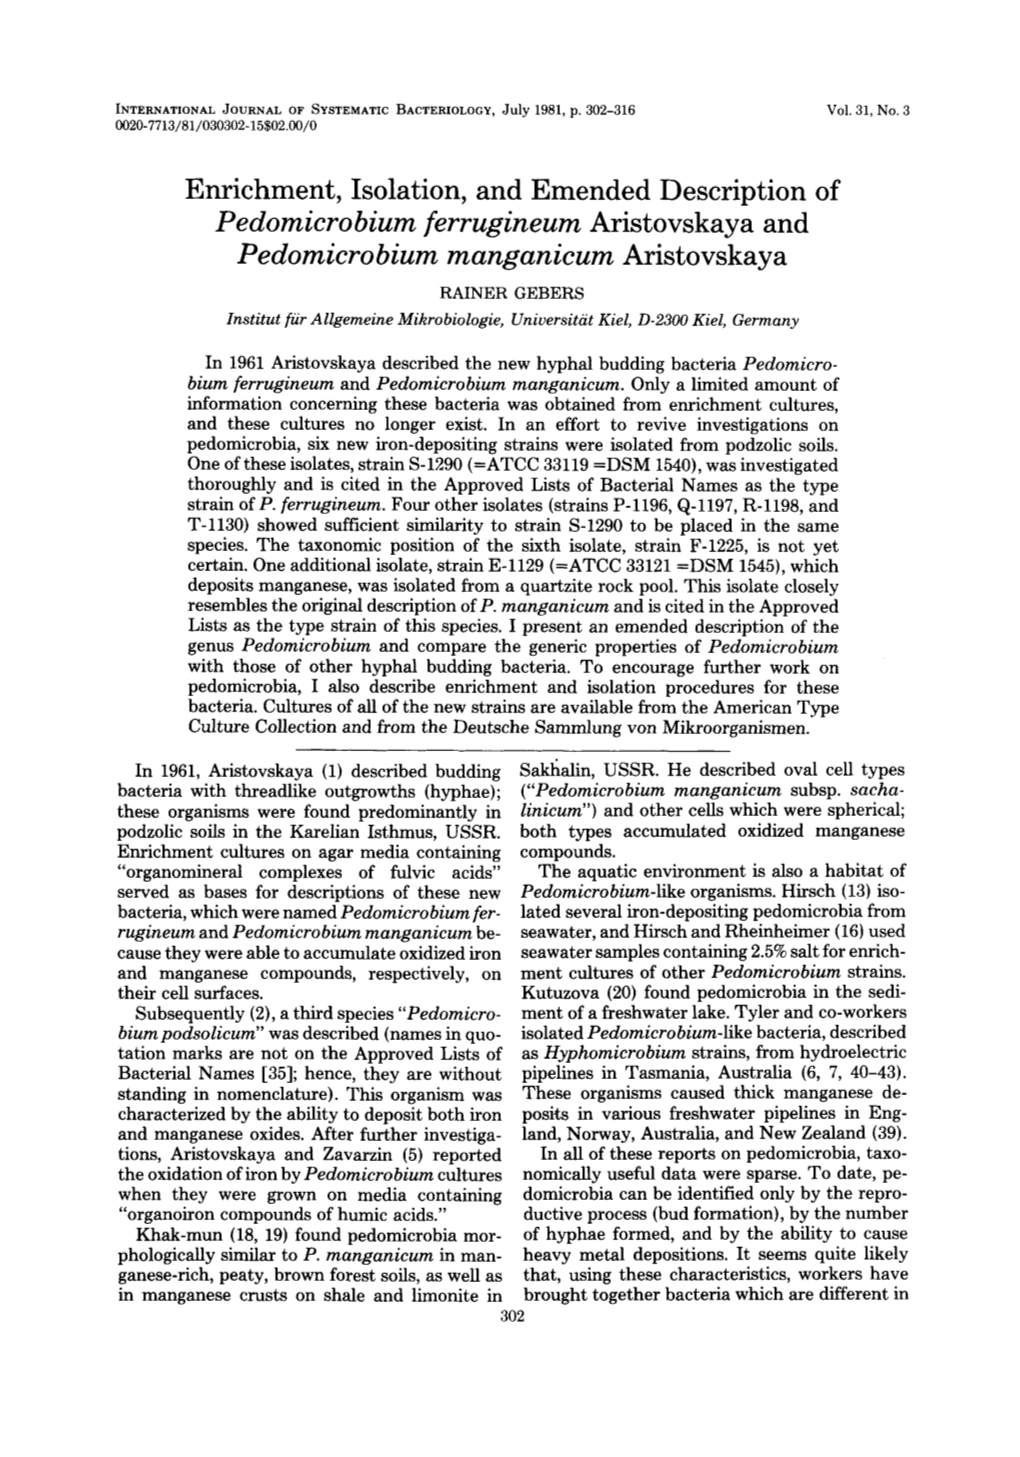 Enrichment, Isolation, and Emended Description of Pedomicrobium